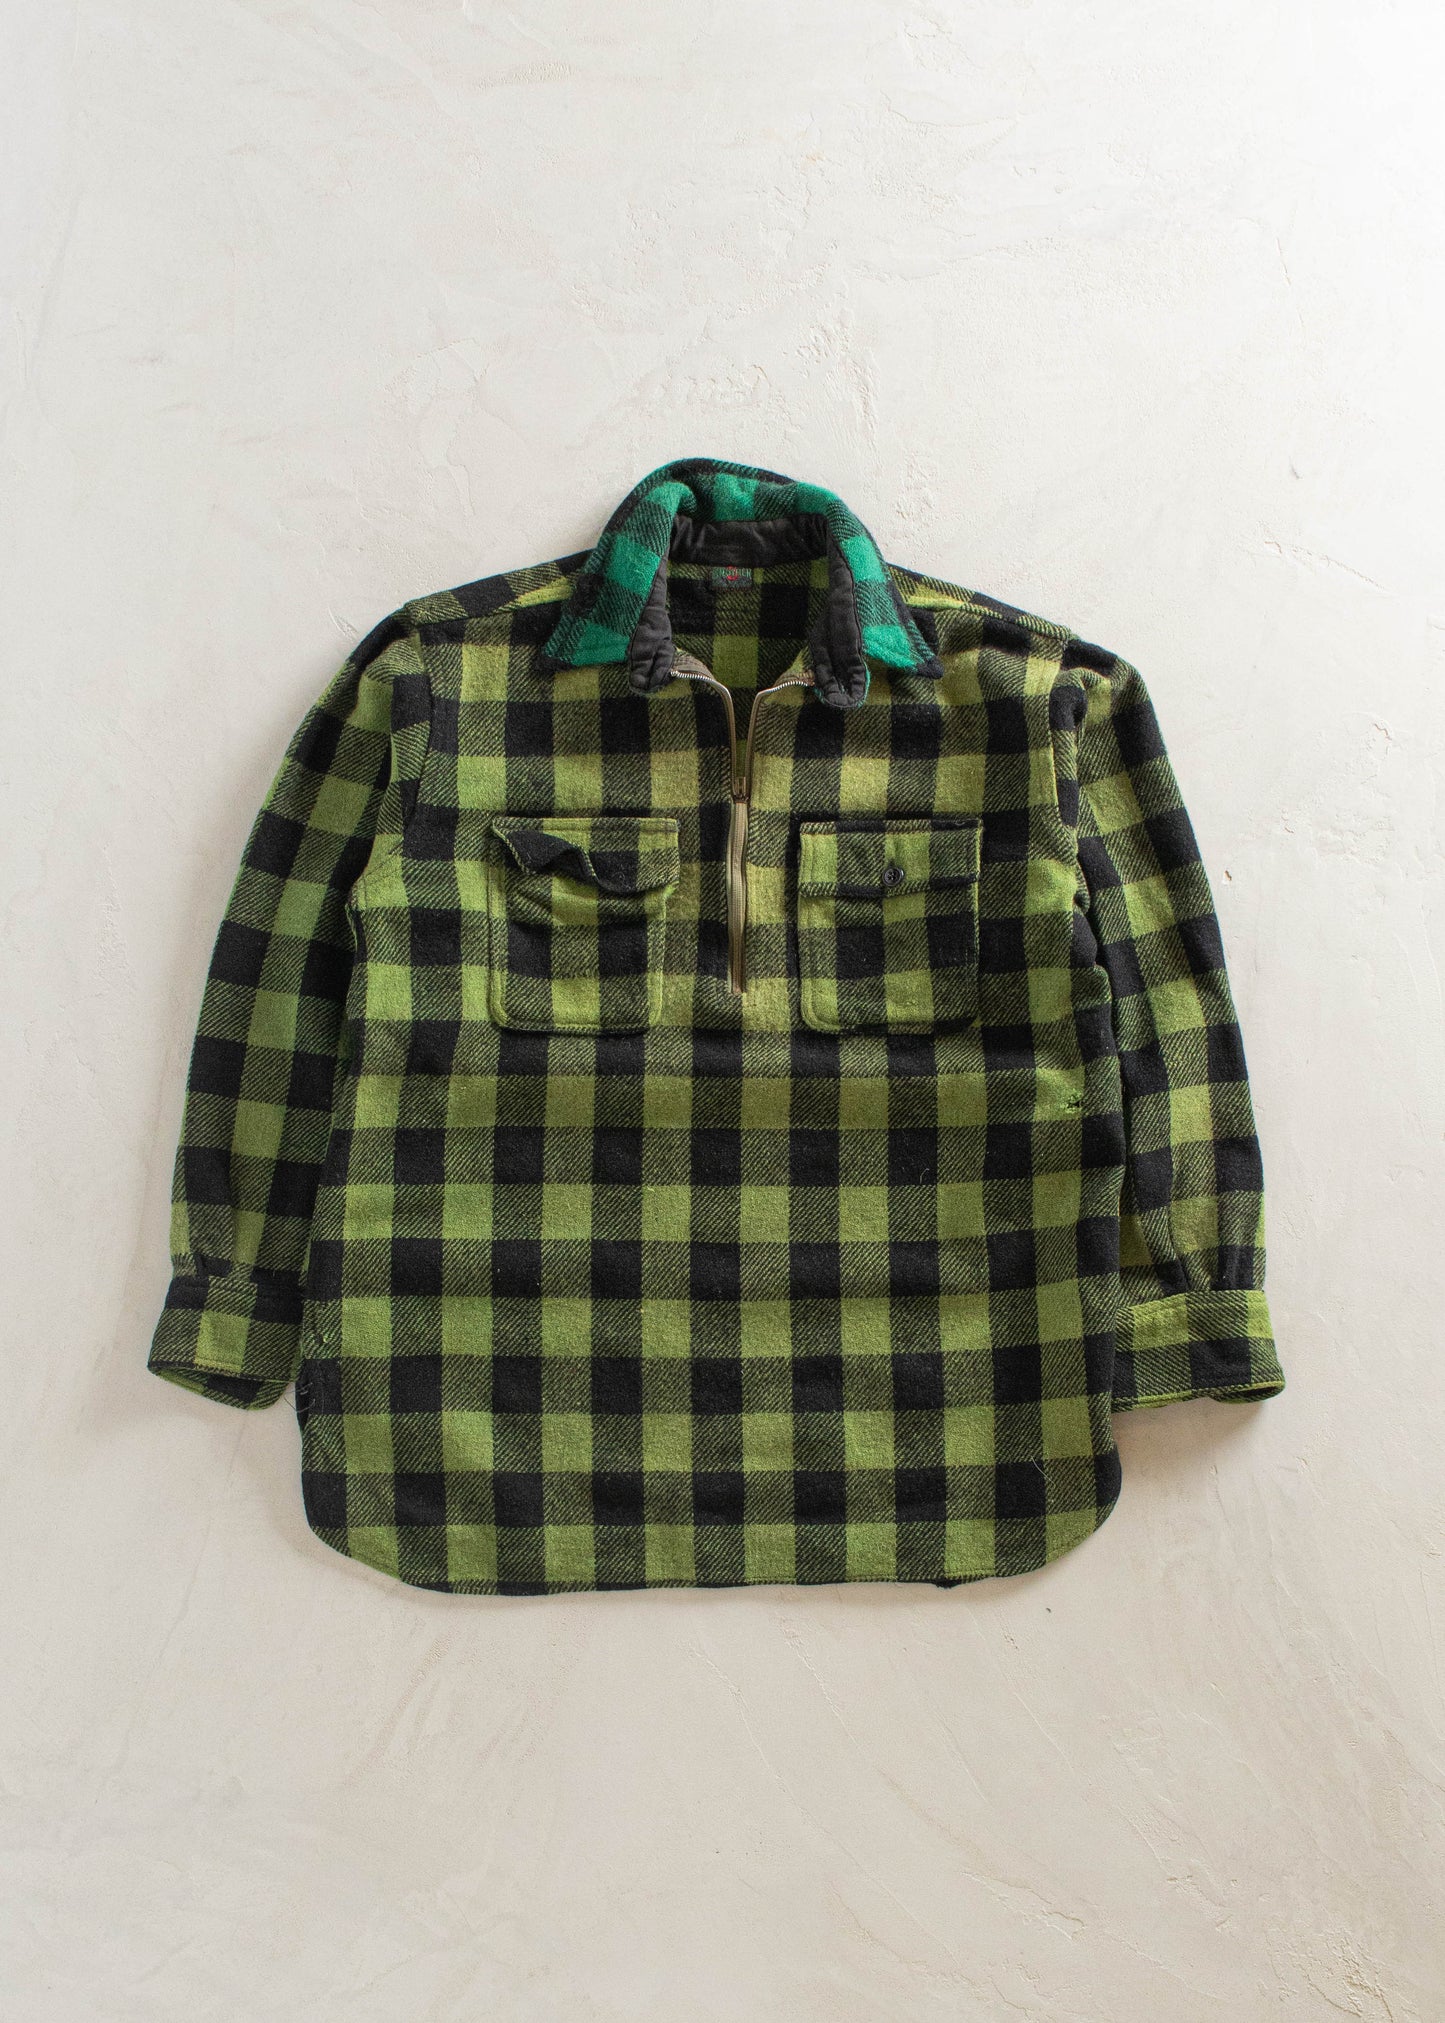 1940s 5 Brothers Half Zip Flannel Shirt Size M/L